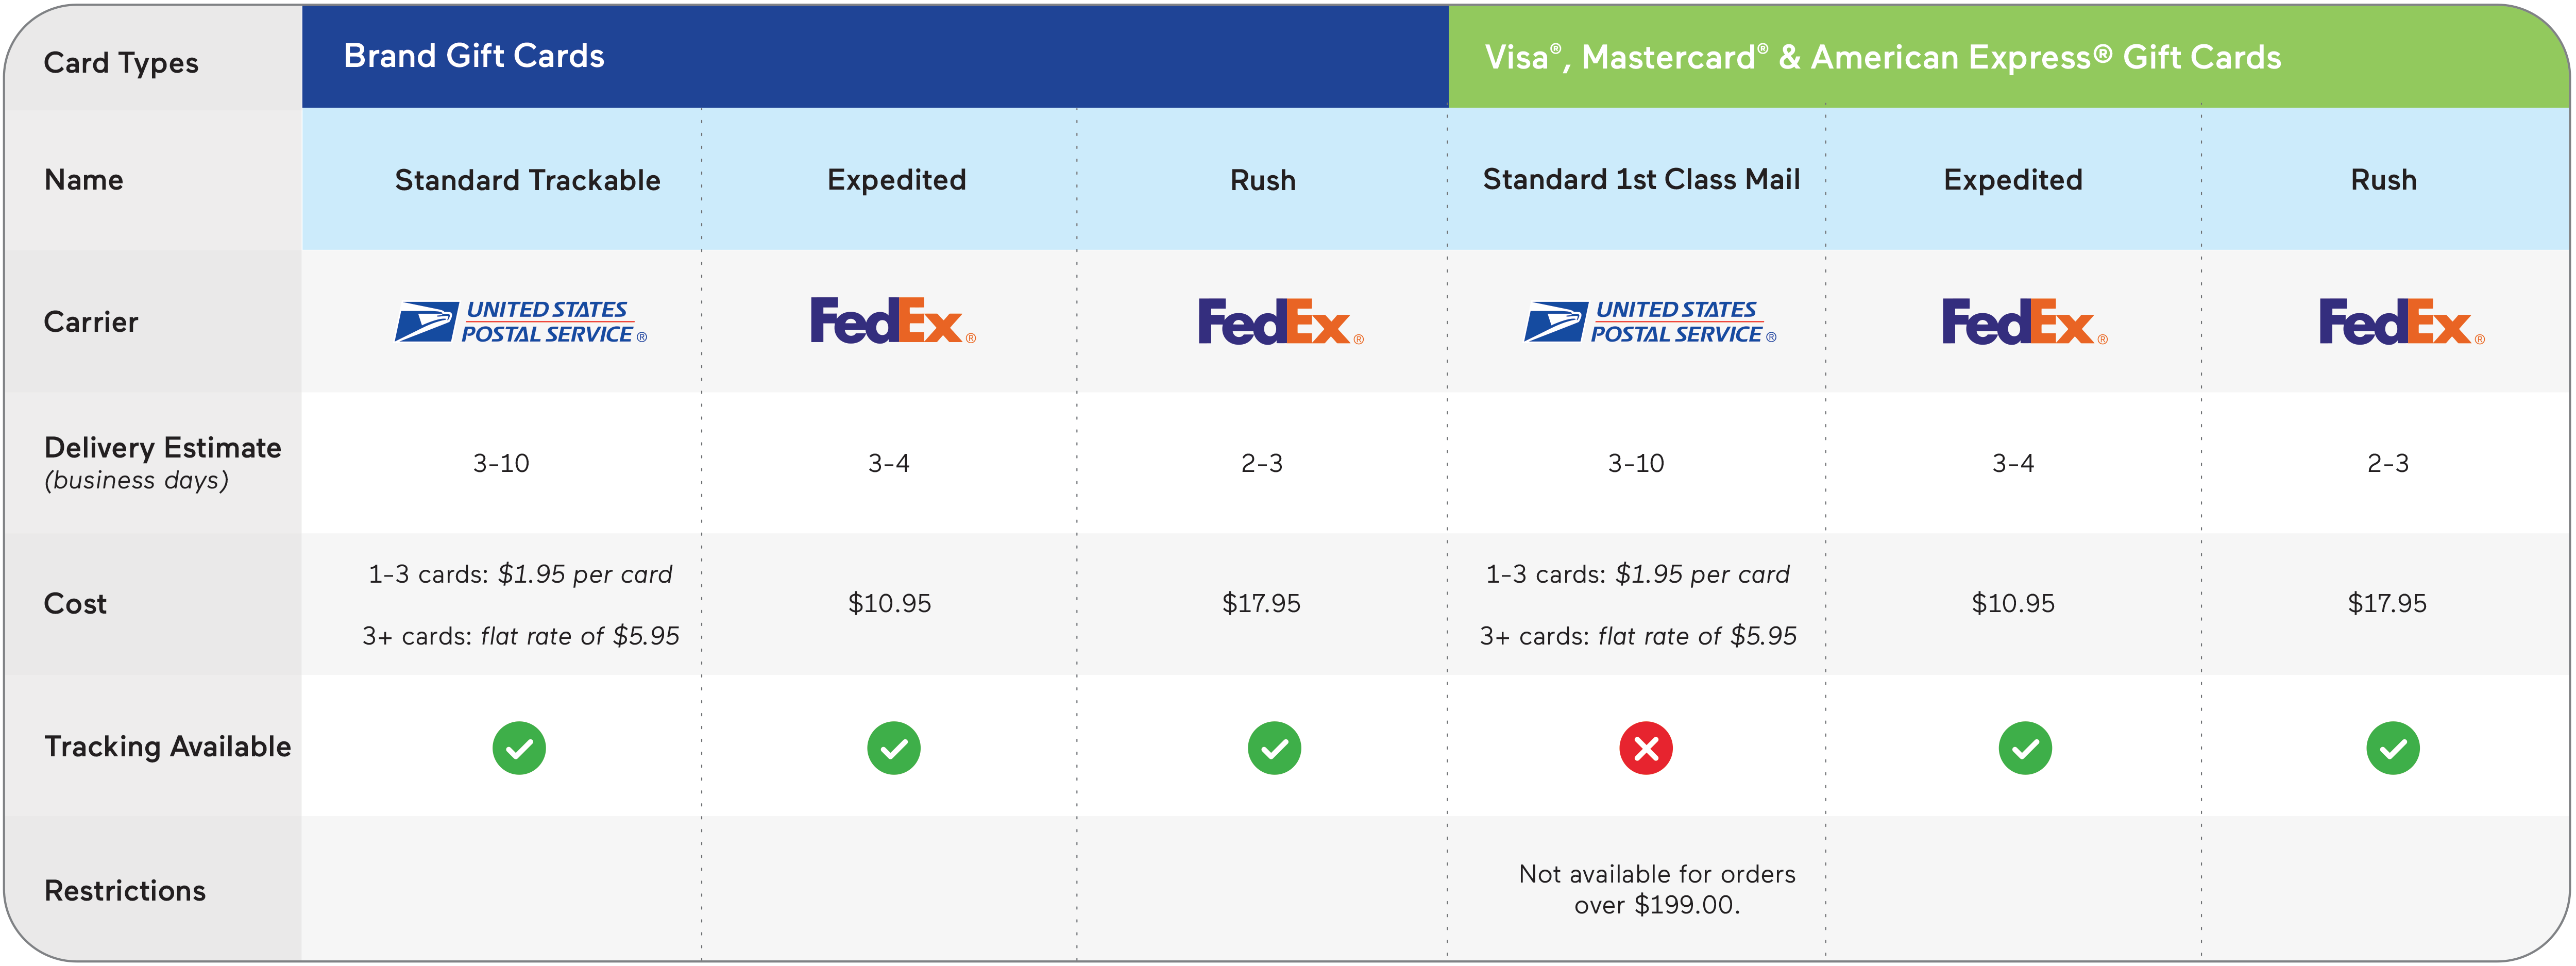 Shipping options comparison chart for brand and Visa/Mastercard/American Express gift cards.